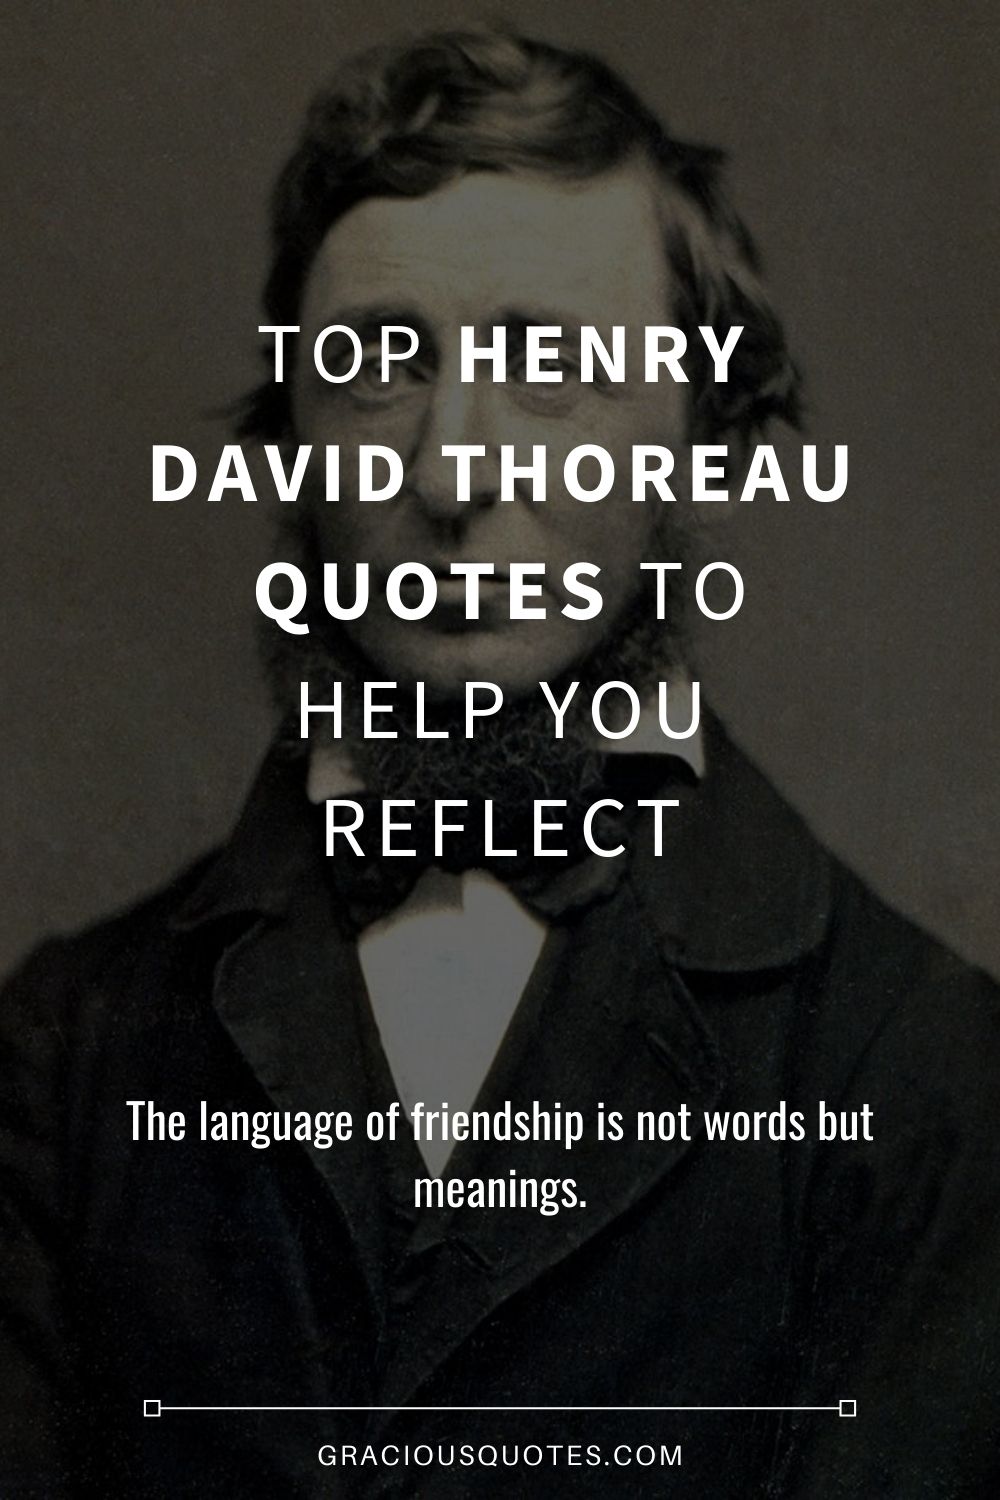 Top Henry David Thoreau Quotes to Help You Reflect - Gracious Quotes